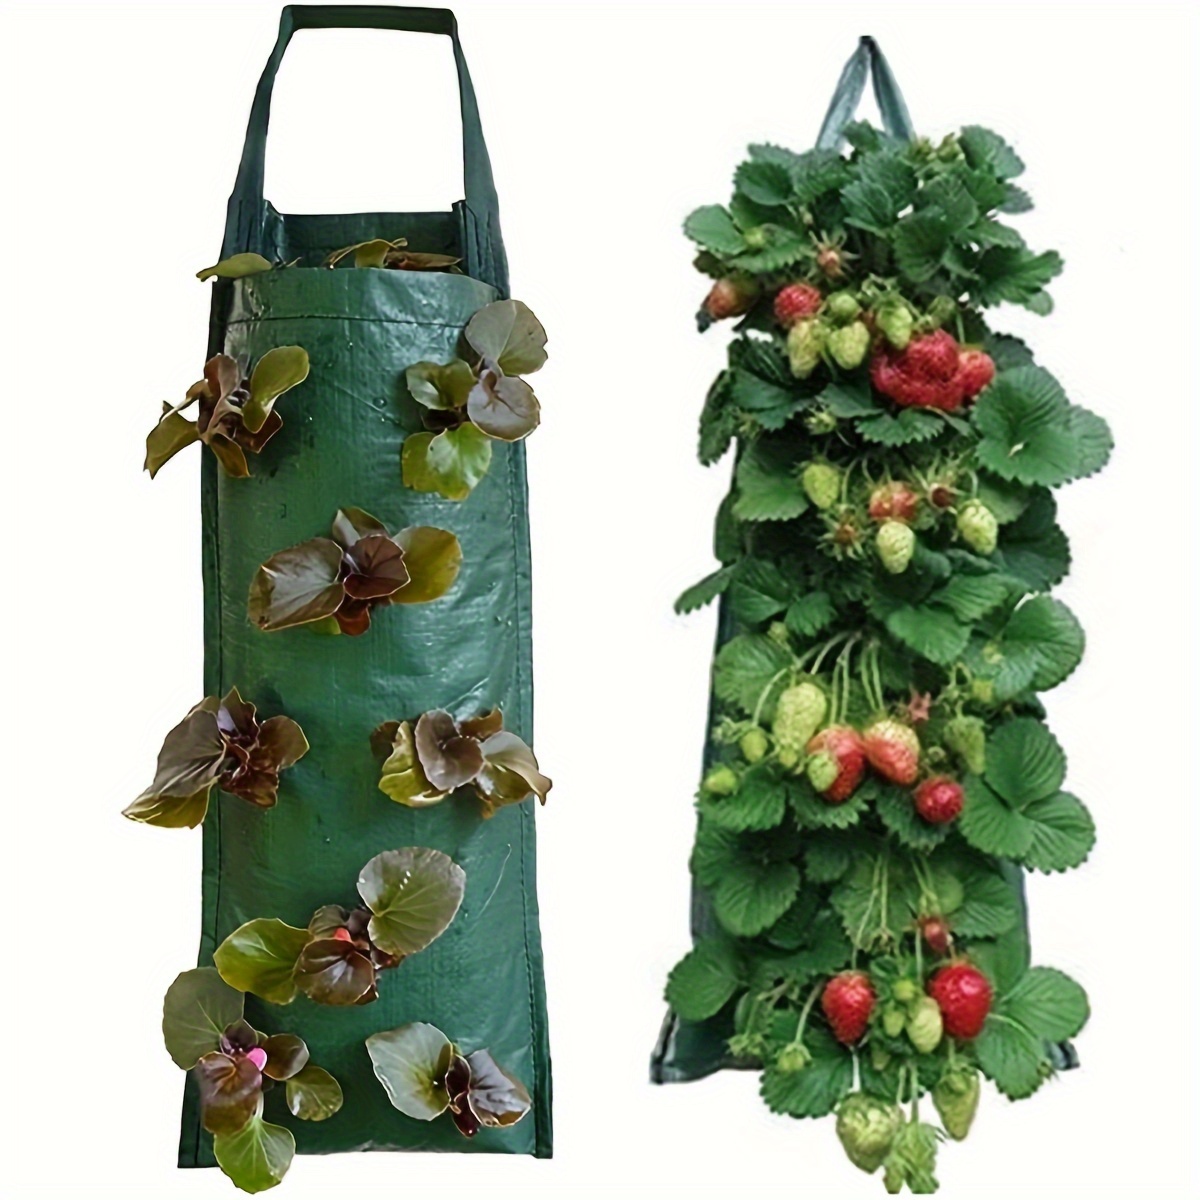 

1pc Durable Hanging Strawberry & Vegetable Planter - Thick Inflatable Fabric With Sturdy Handle, Perfect For Tomatoes, Chili & More - Outdoor Garden Grow Bag